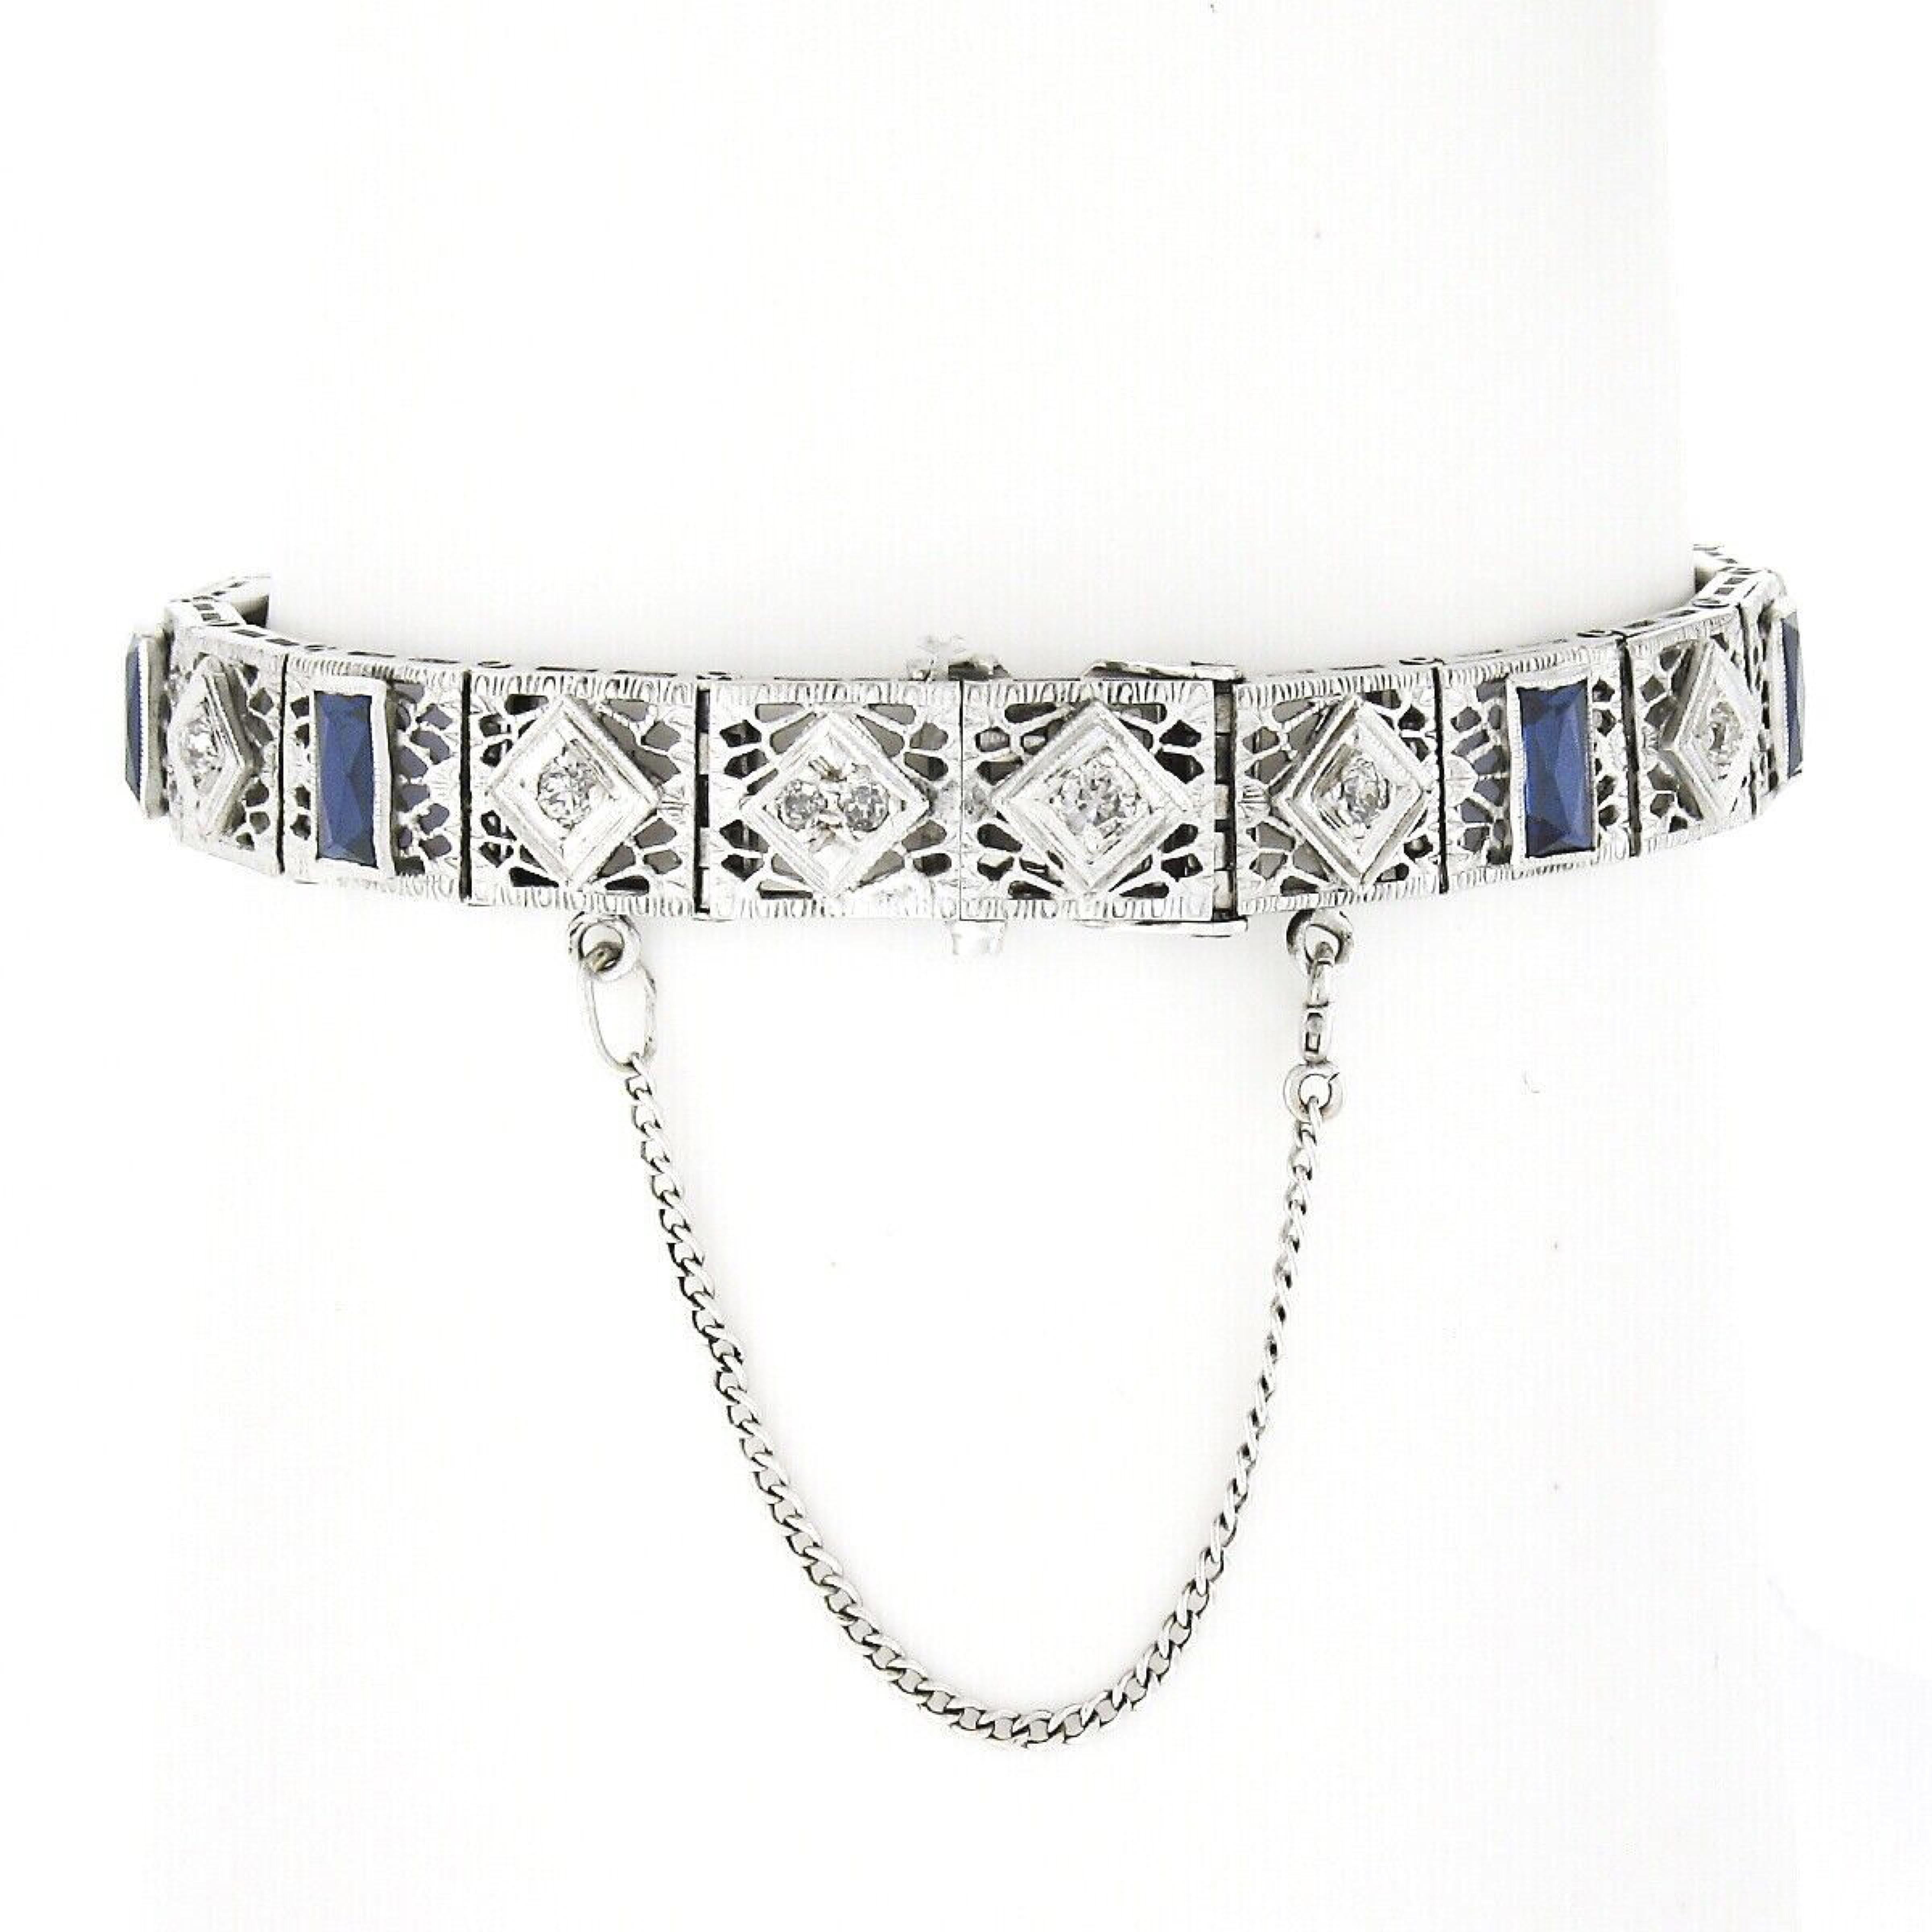 Here we have a truly breathtaking antique bracelet that was crafted from solid 14k white gold during the art deco period, featuring a domed centerpiece with magnificently executed open filigree work at each of the square links adorned with delicate